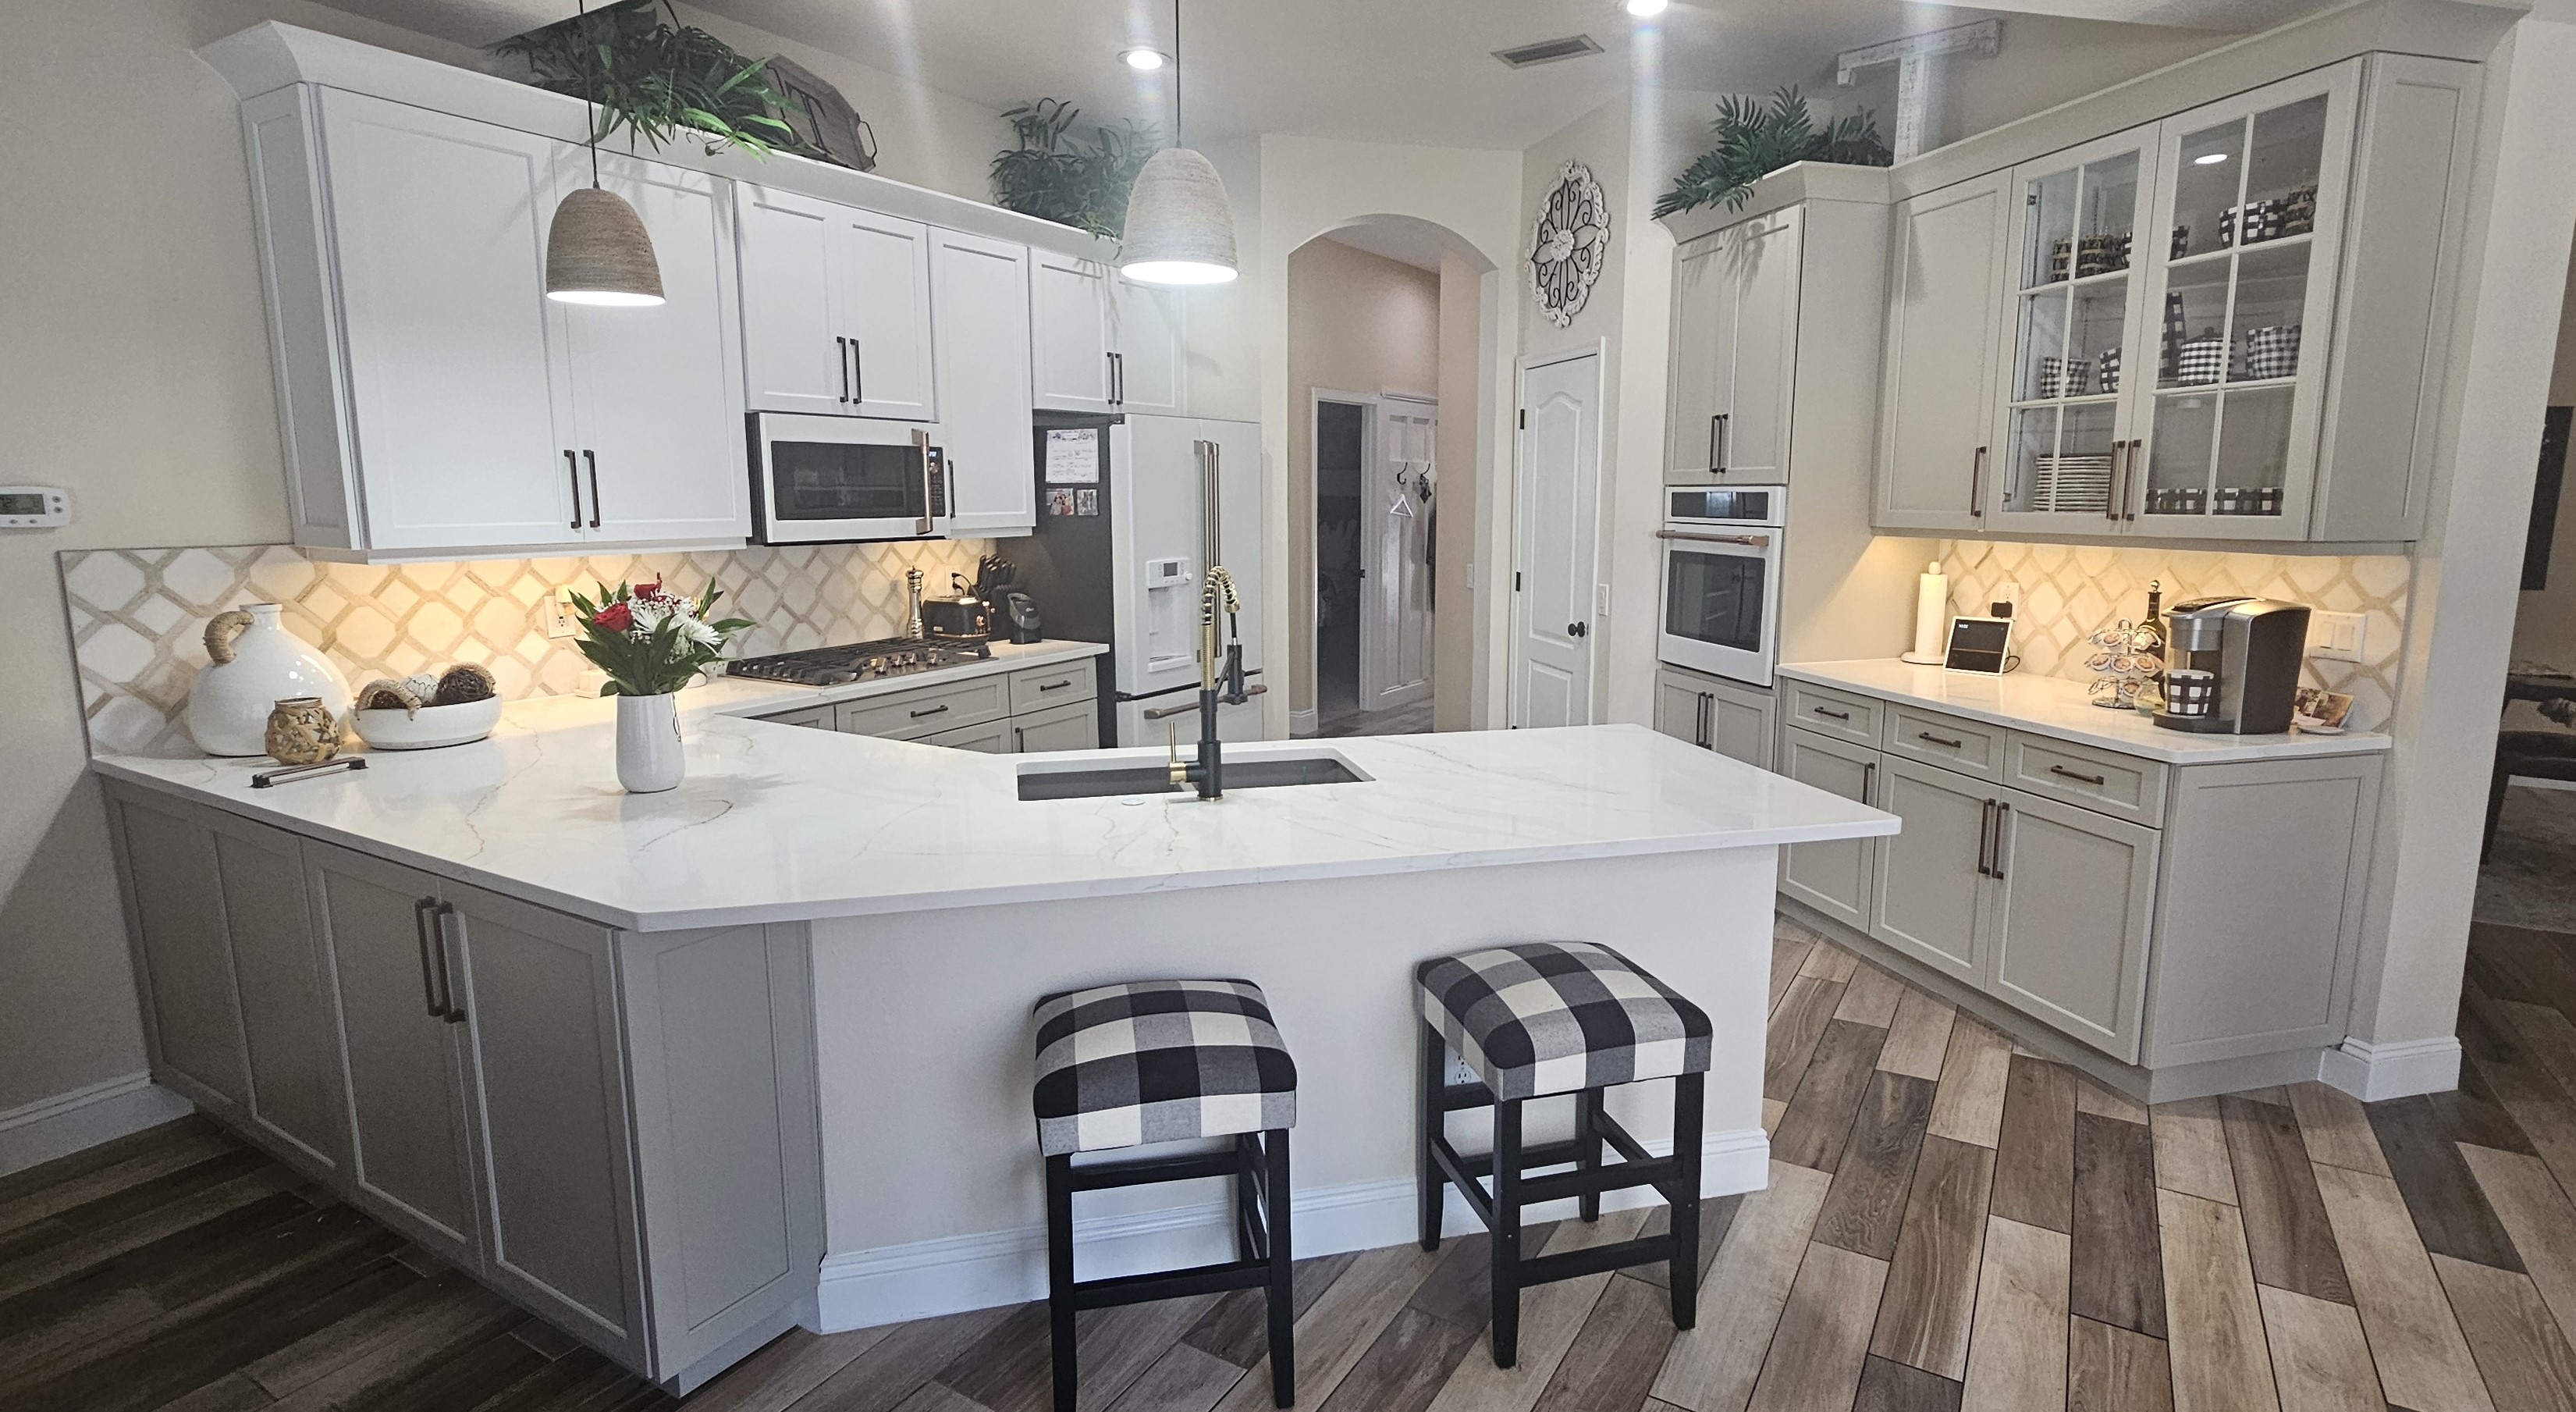 Modern appliances with a high-quality finish, granite worktops, and sleek white kitchen cabinets in Belleair.